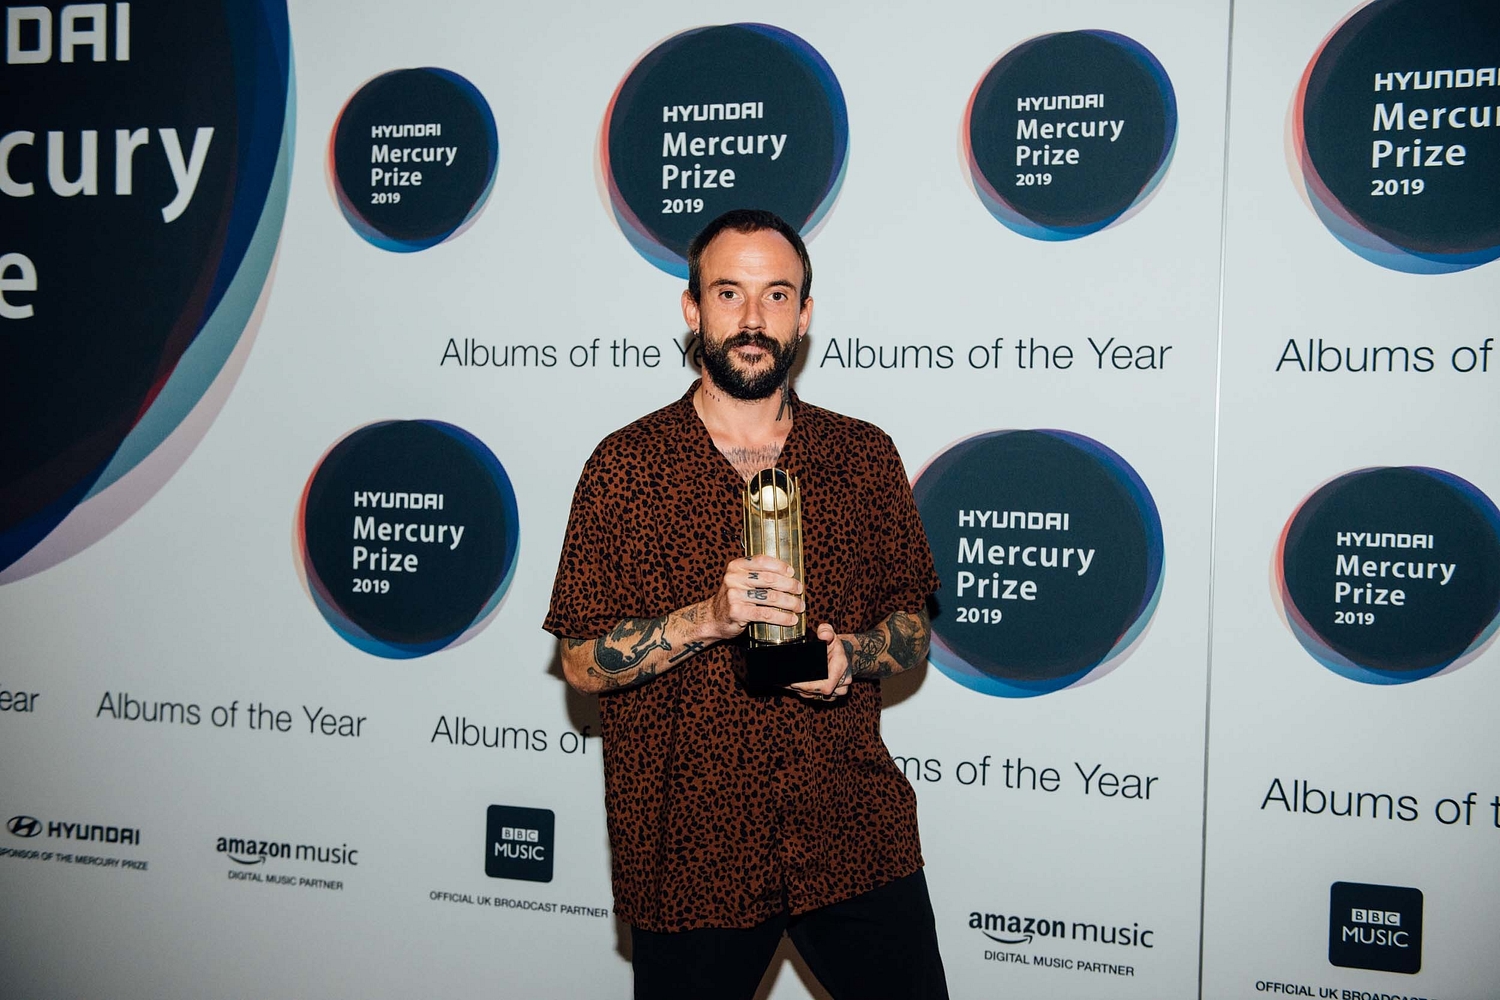 “We’re not about ego boosts, but it’s nice to celebrate the album” - IDLES talk their Hyundai Mercury Prize spot